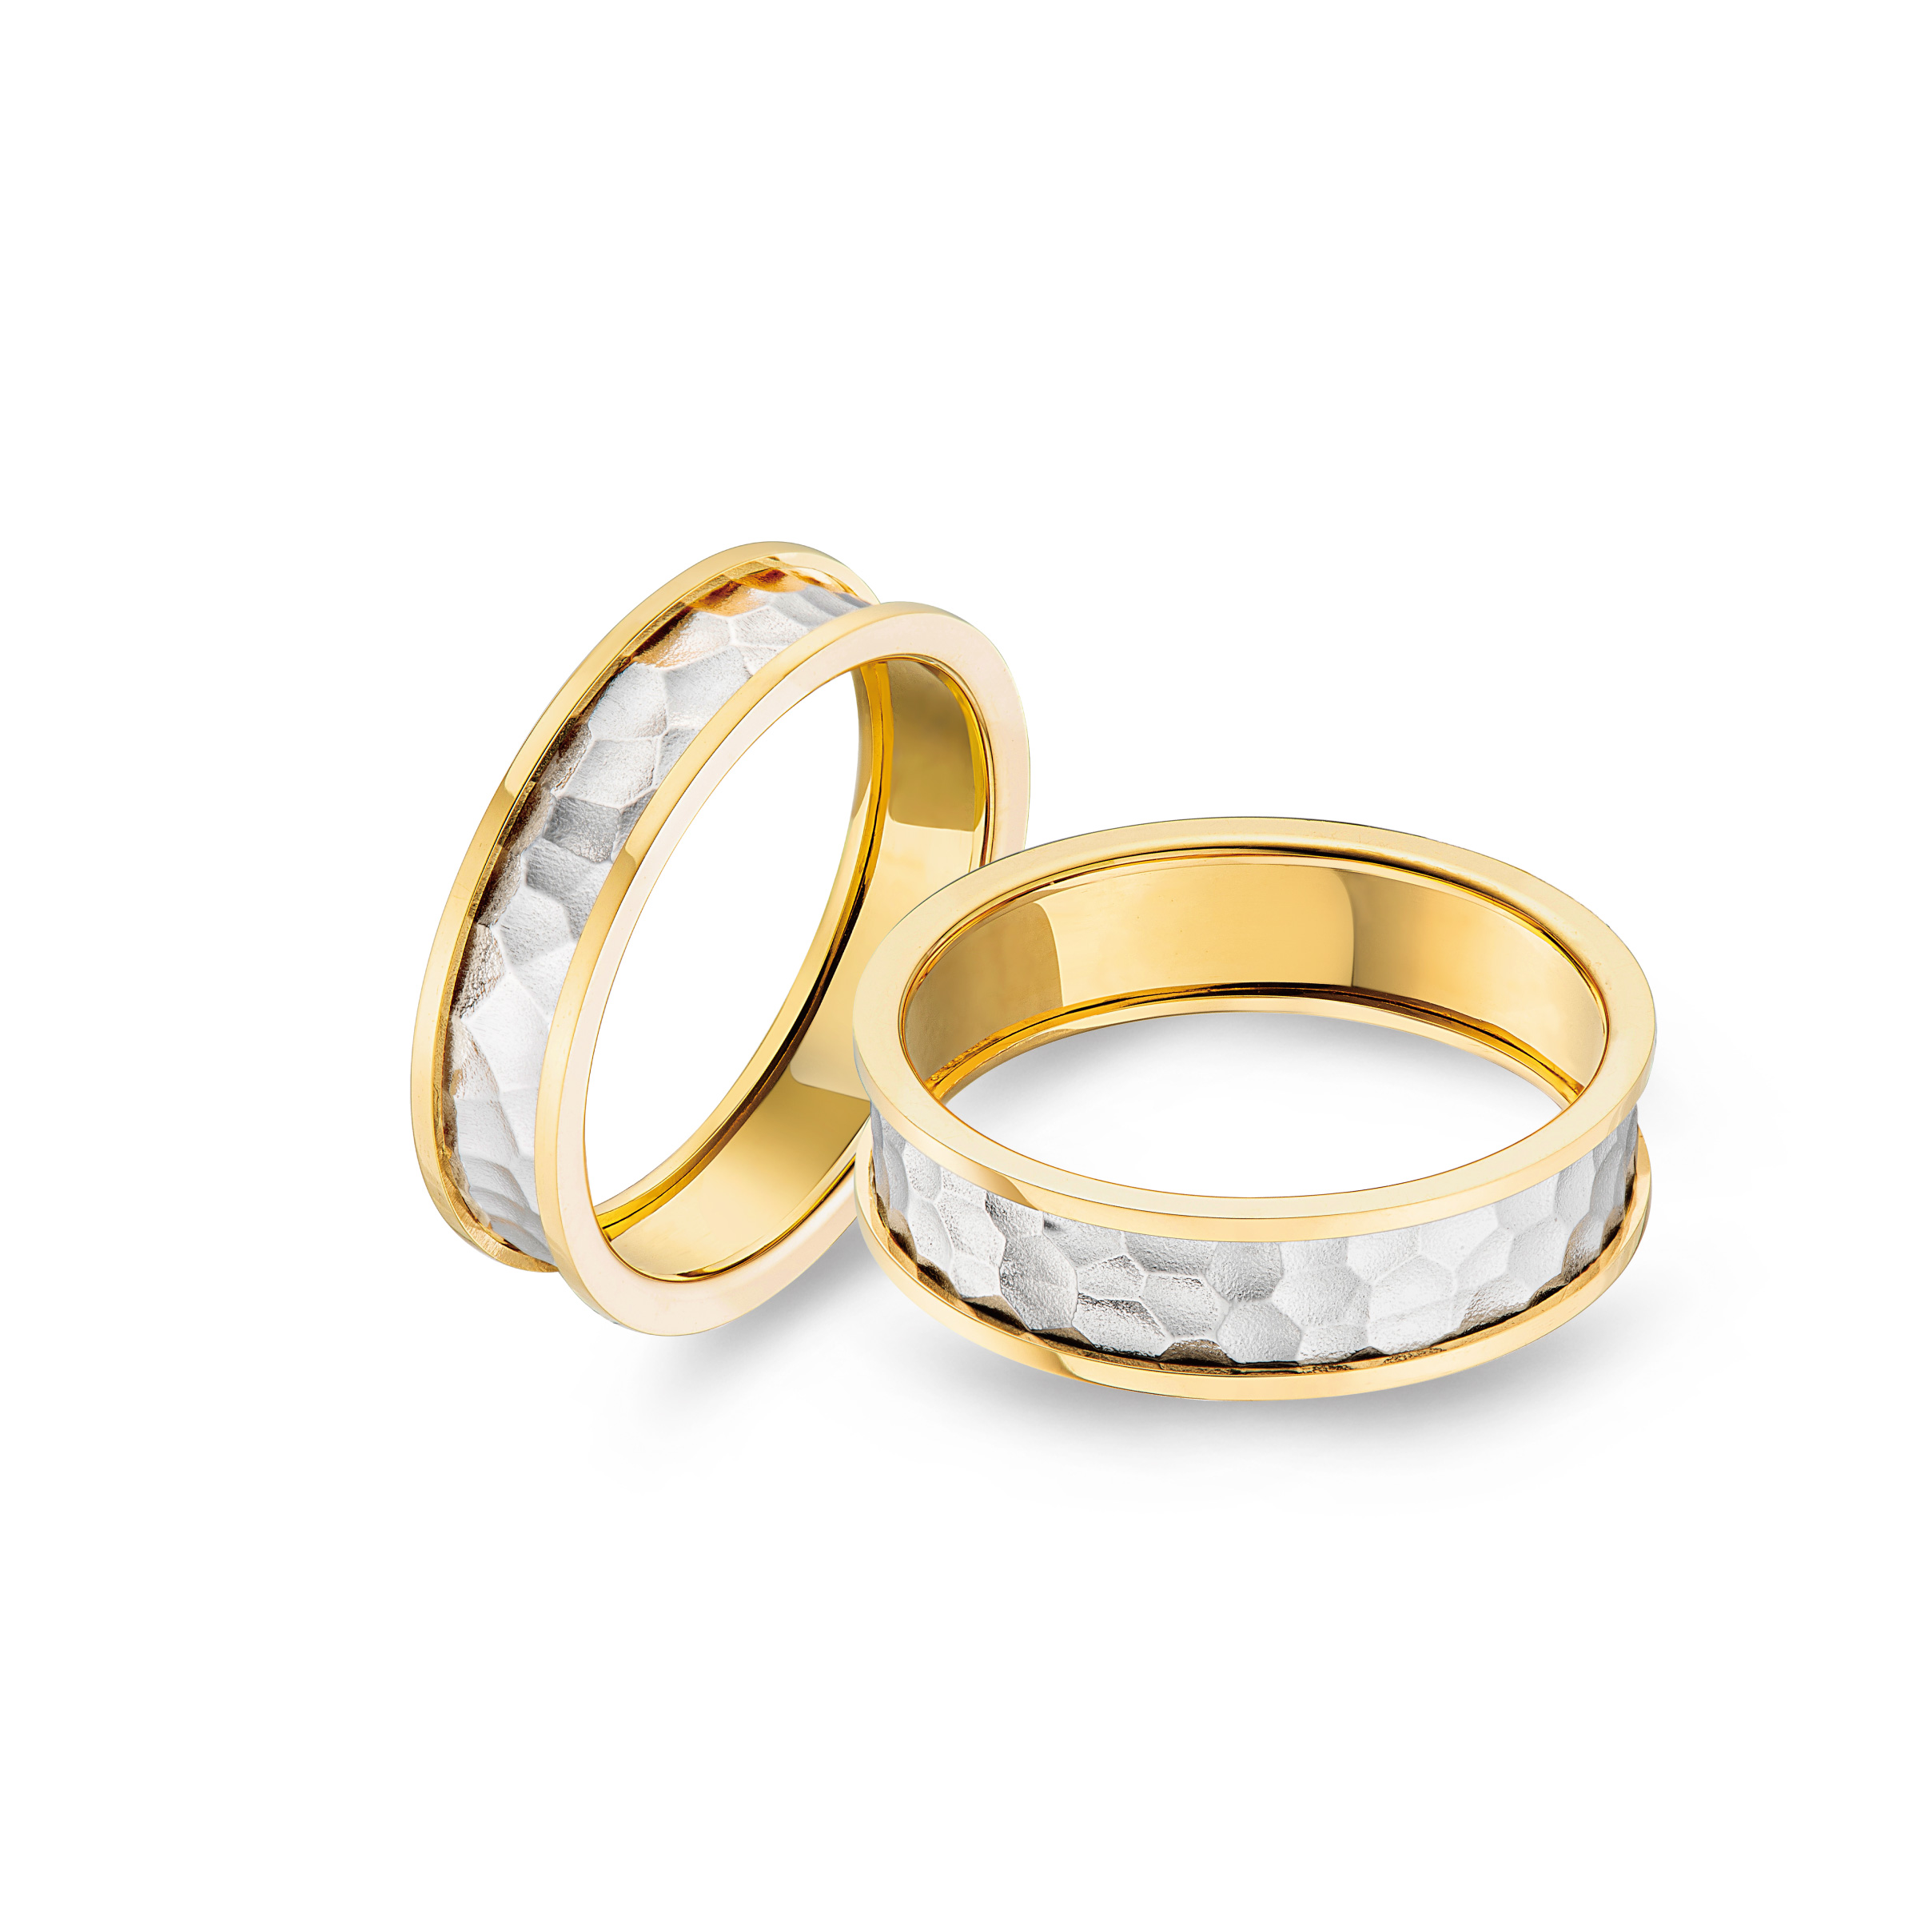 Goldstyle Love Sentiments Rings